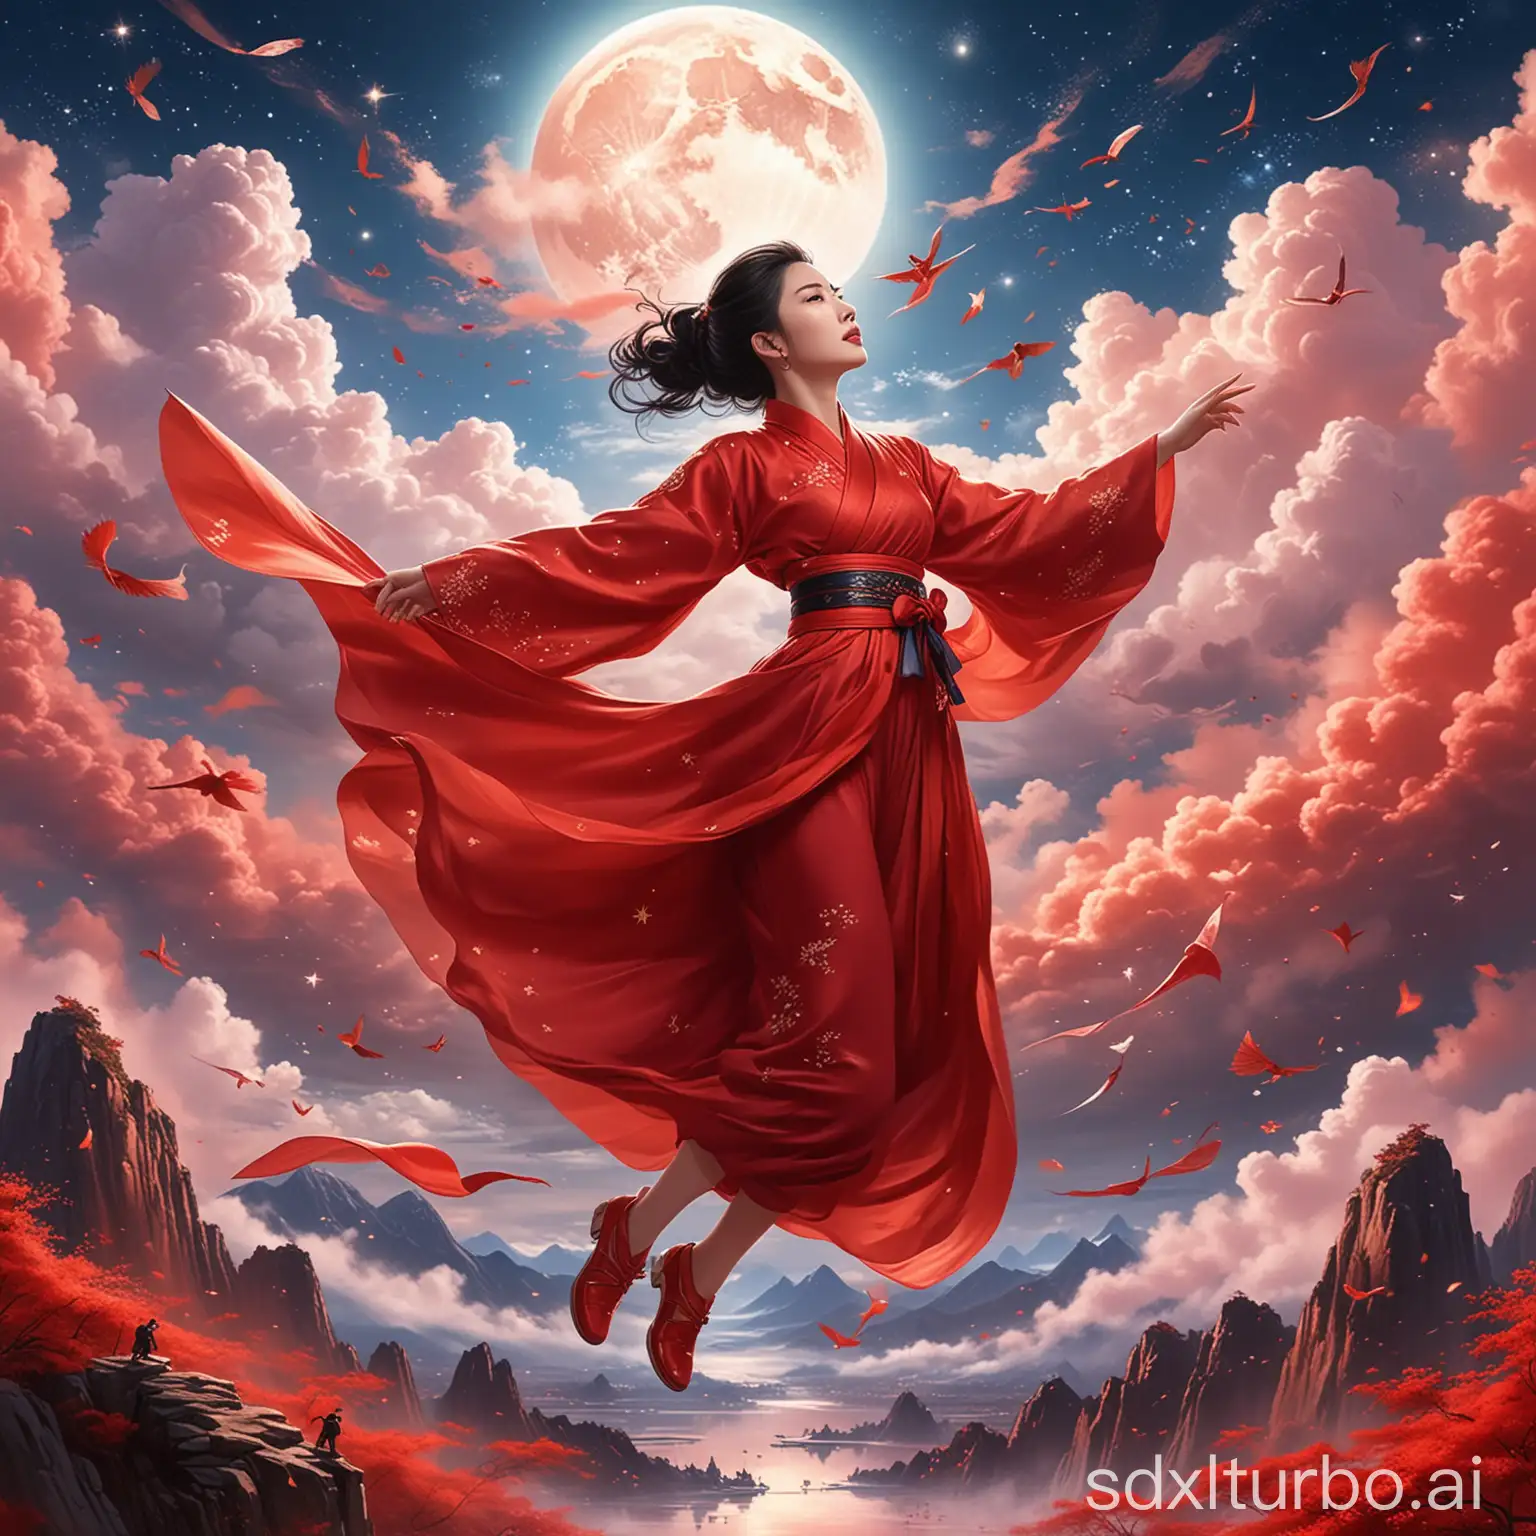 Liu Yifei in the shape of Mulan is floating in the sky, wearing a bright red dress, short hair, a cloud under her feet, there are many stars around, and a bank can be seen, illustration style